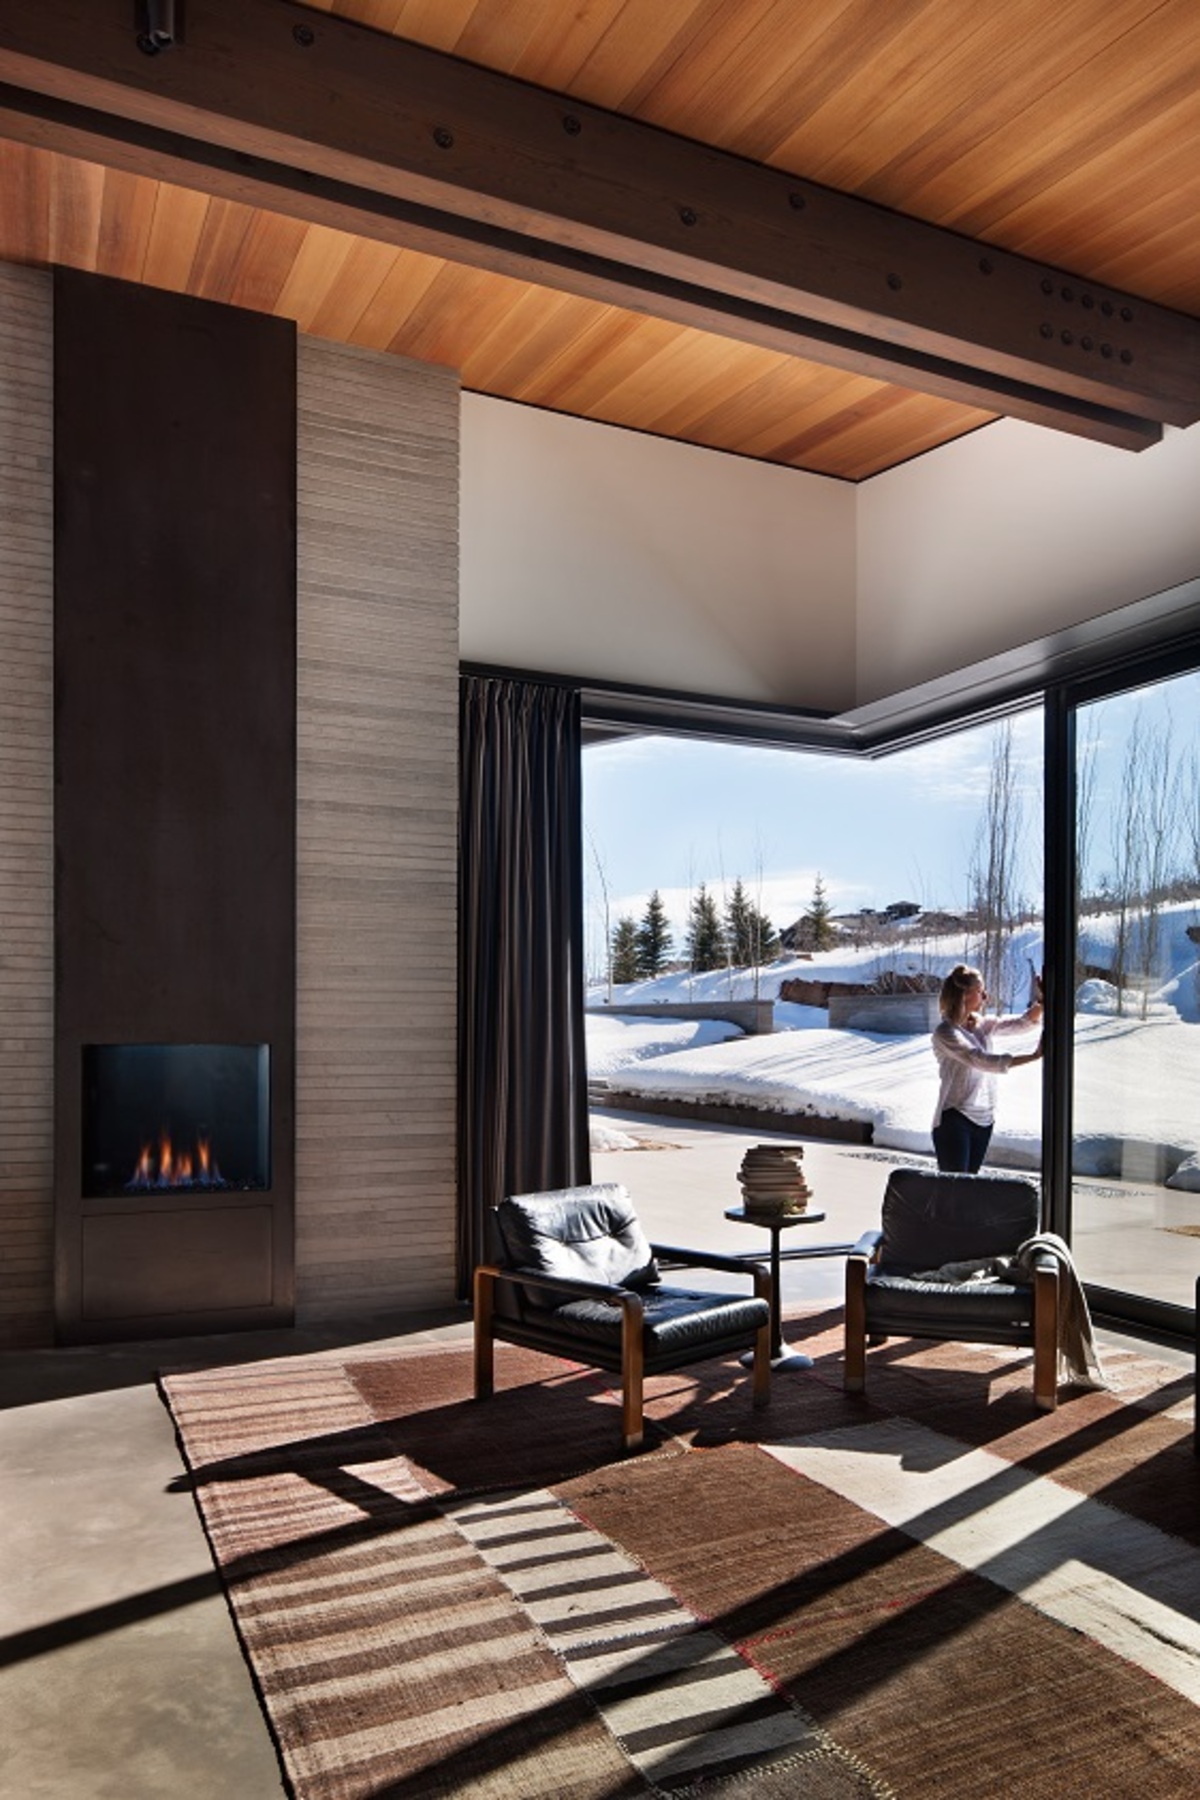 In this modern room, a fireplace with a black surround draws the eye up to the high ceilings and exposed wood beams. Sliding glass doors open the interior to the outdoors.